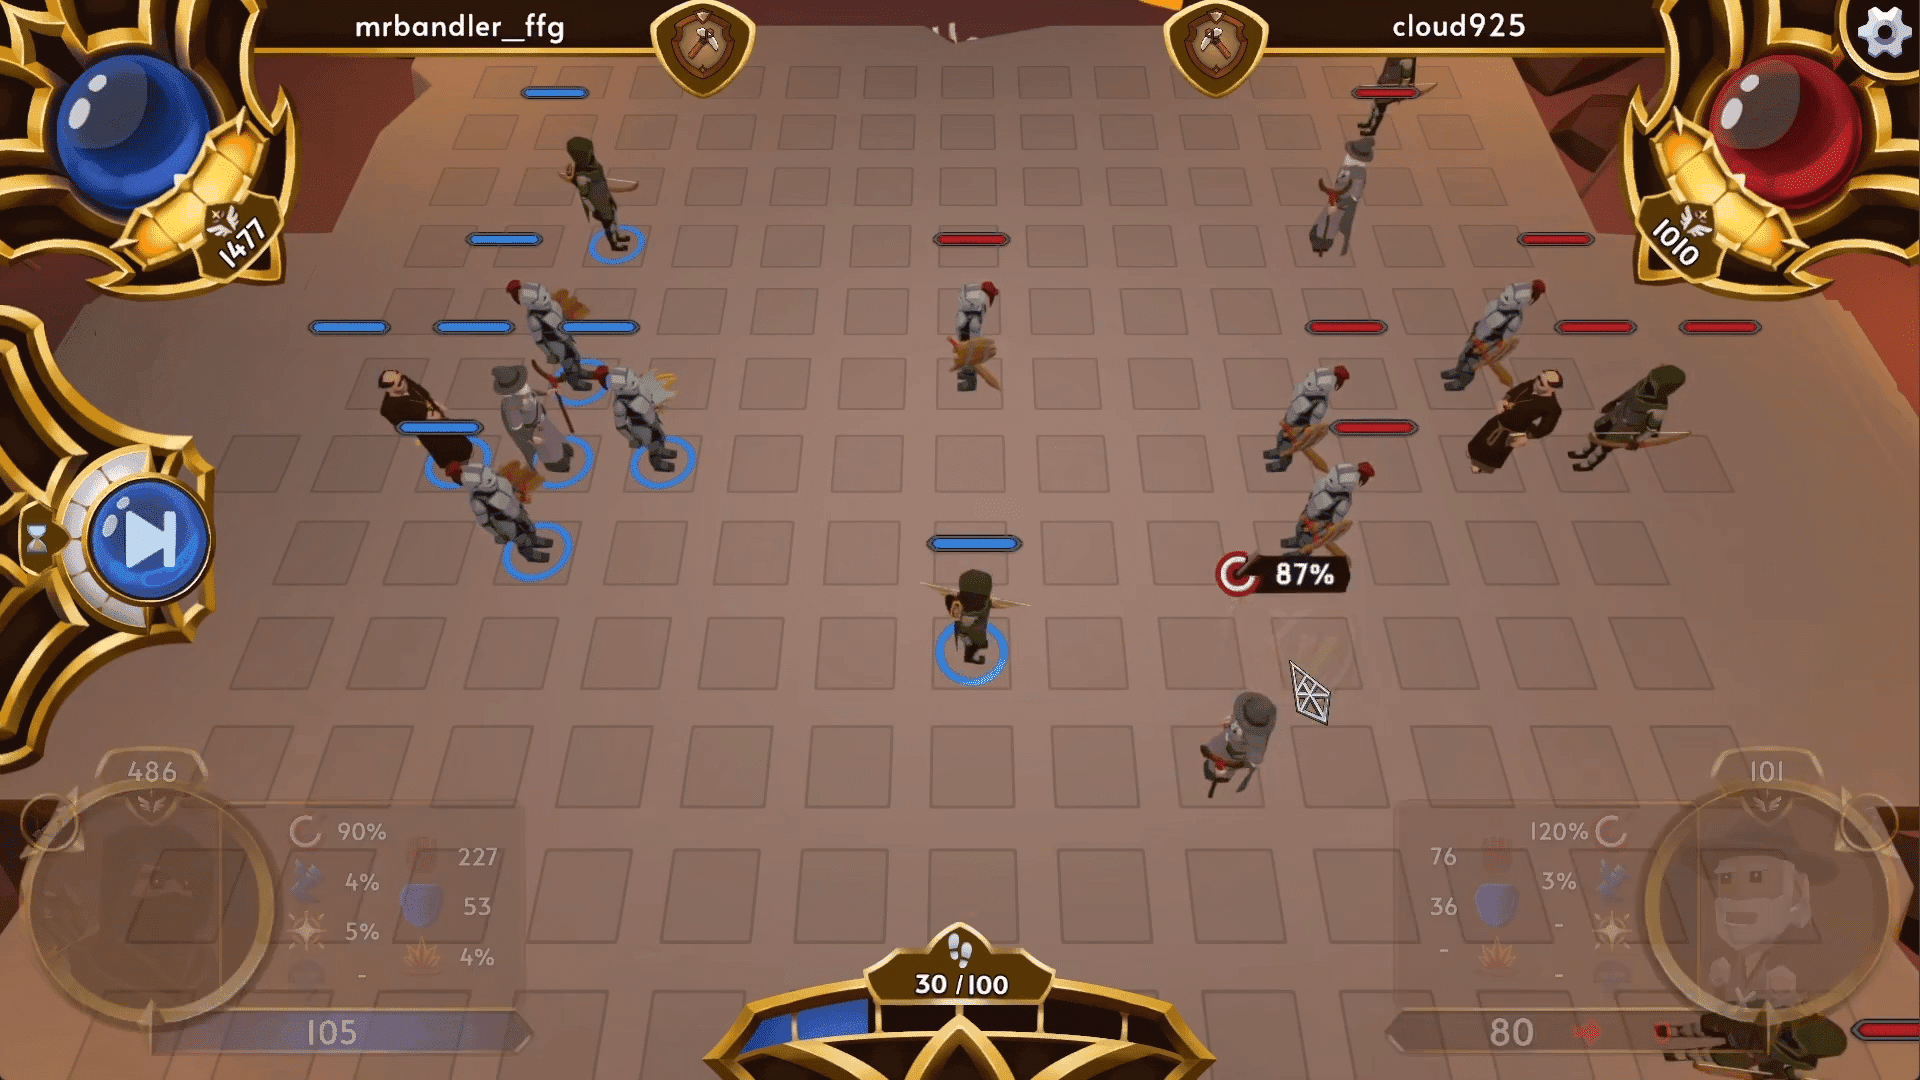 Experience a RPG-inspired turn-based tactics PvP multiplayer title that melds chess-like strategy with the thrill of gathering items.